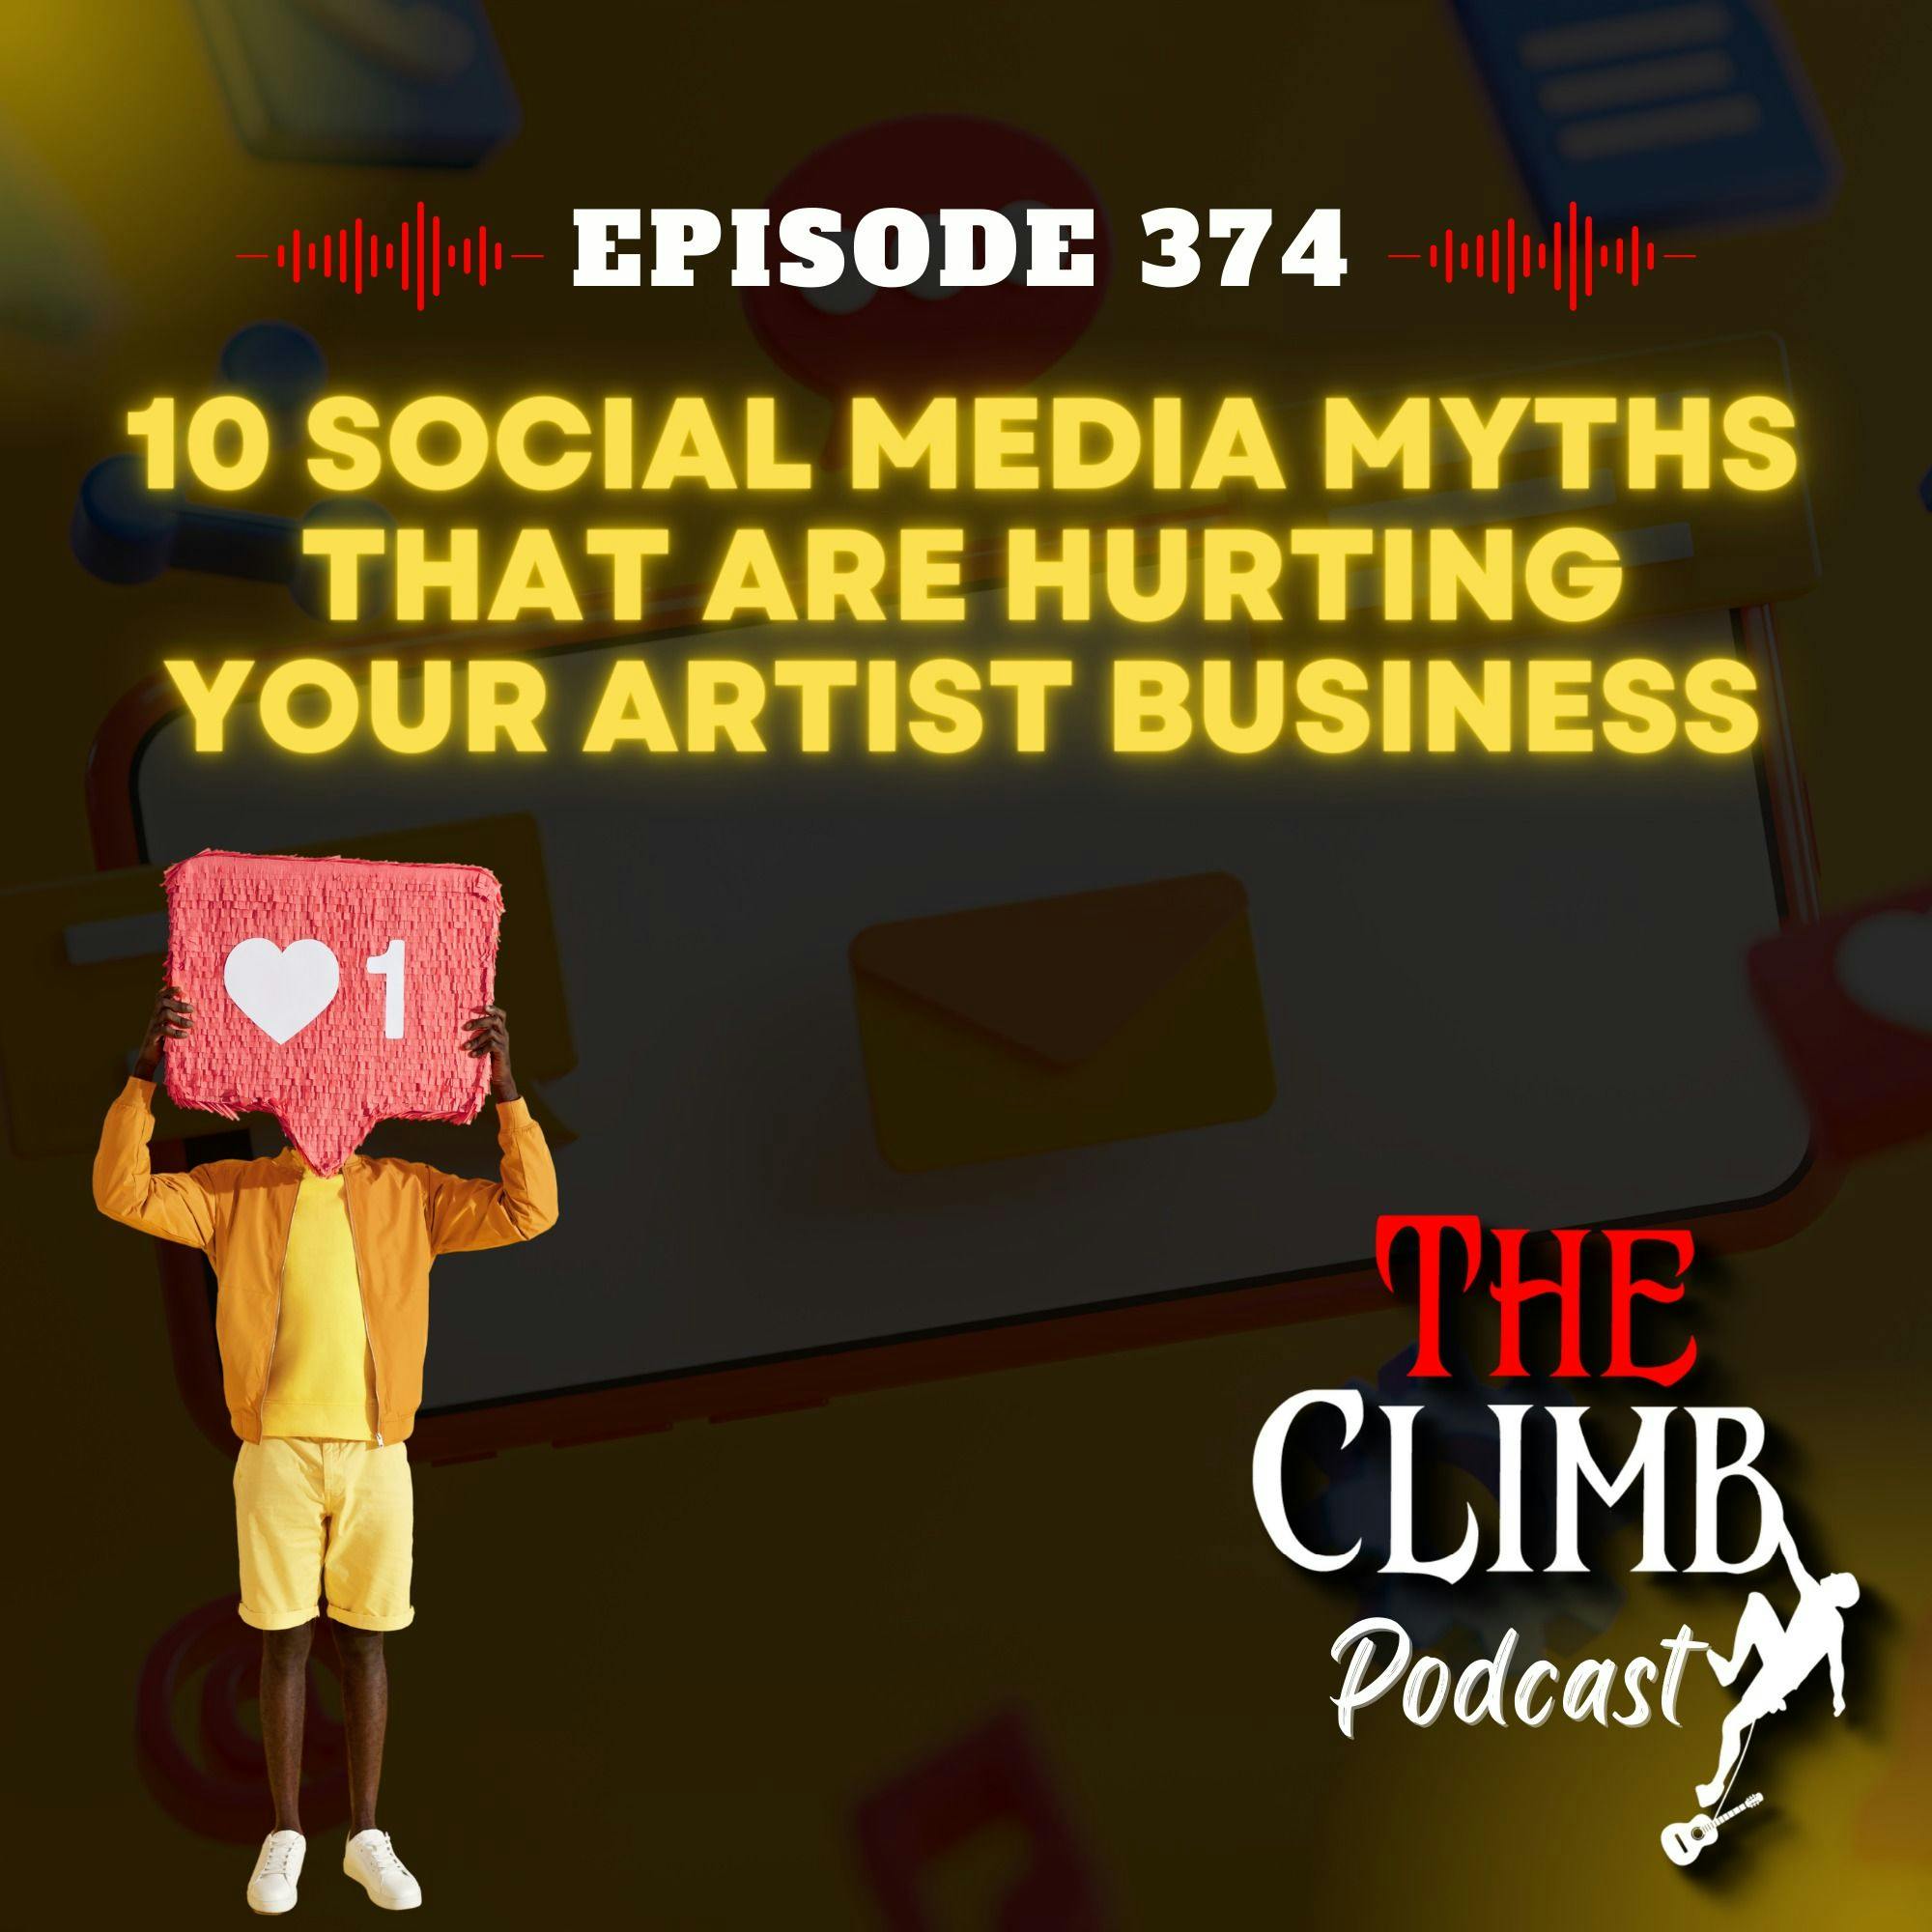 Ep 374: 10 Social Media Myths That Are Hurting Your Artist Business